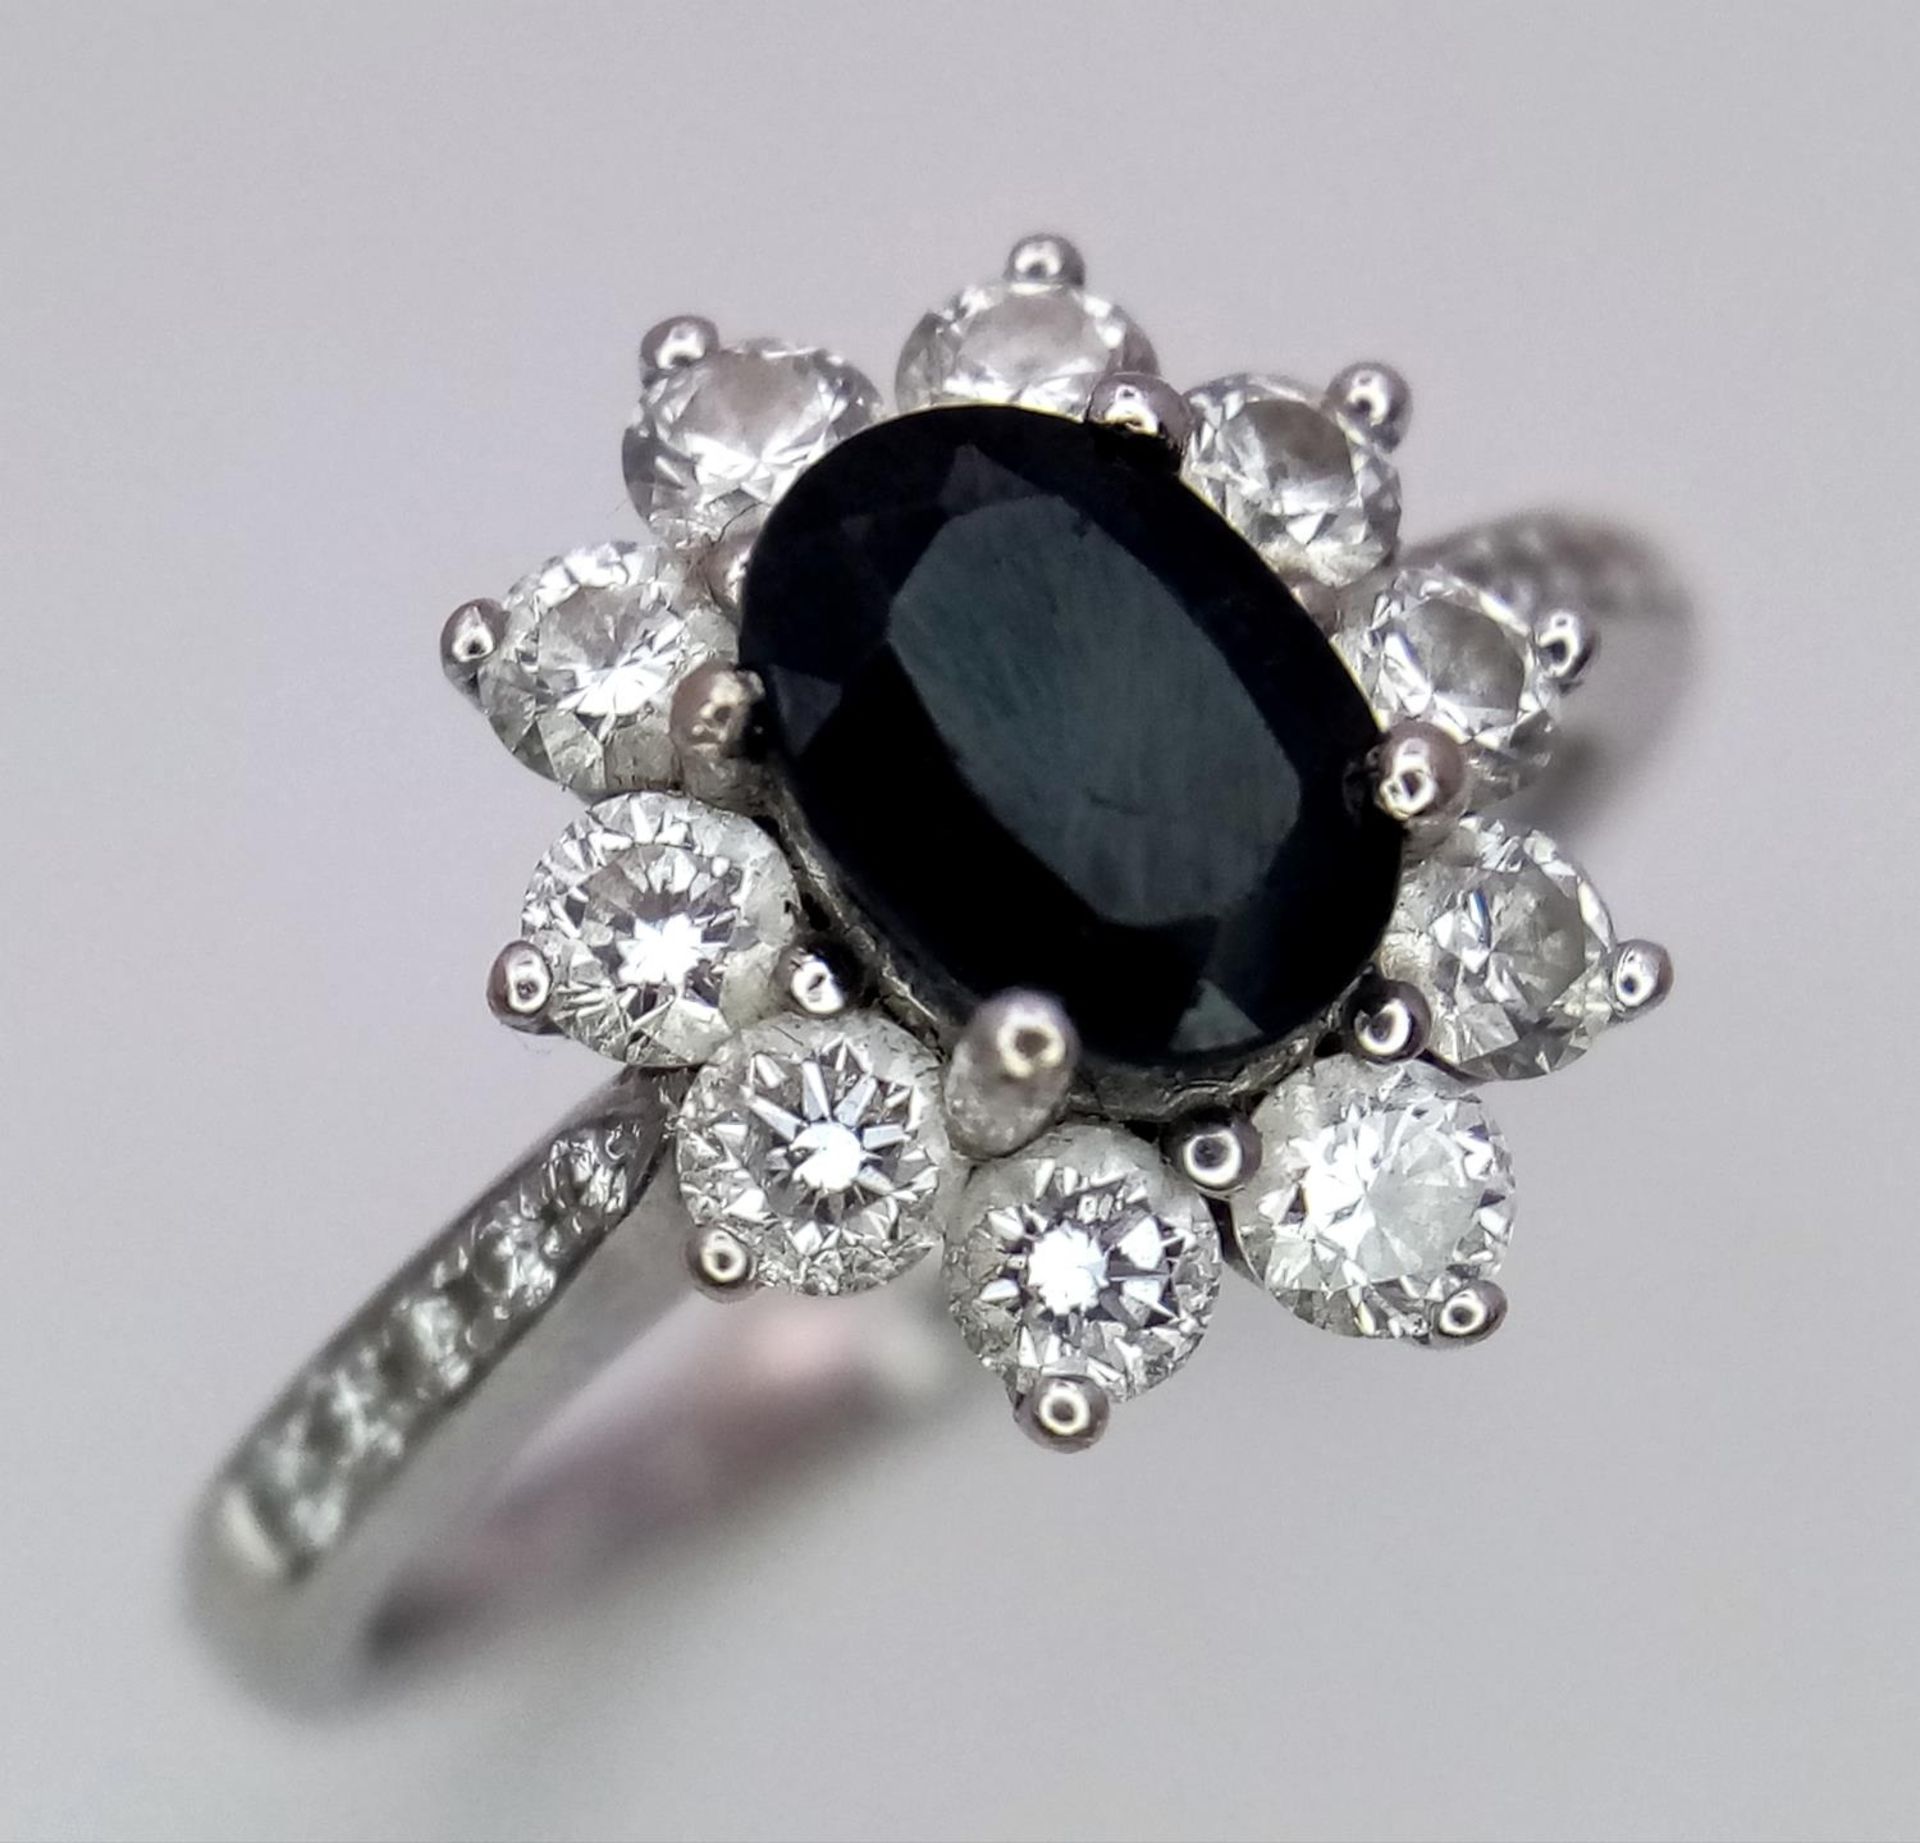 A 18K (TESTED AS) WHITE GOLD DIAMOND & SAPPHIRE CLUSTER RING 0.50CT DIAMONDS & 1CT OVAL SAPPHIRE 4.